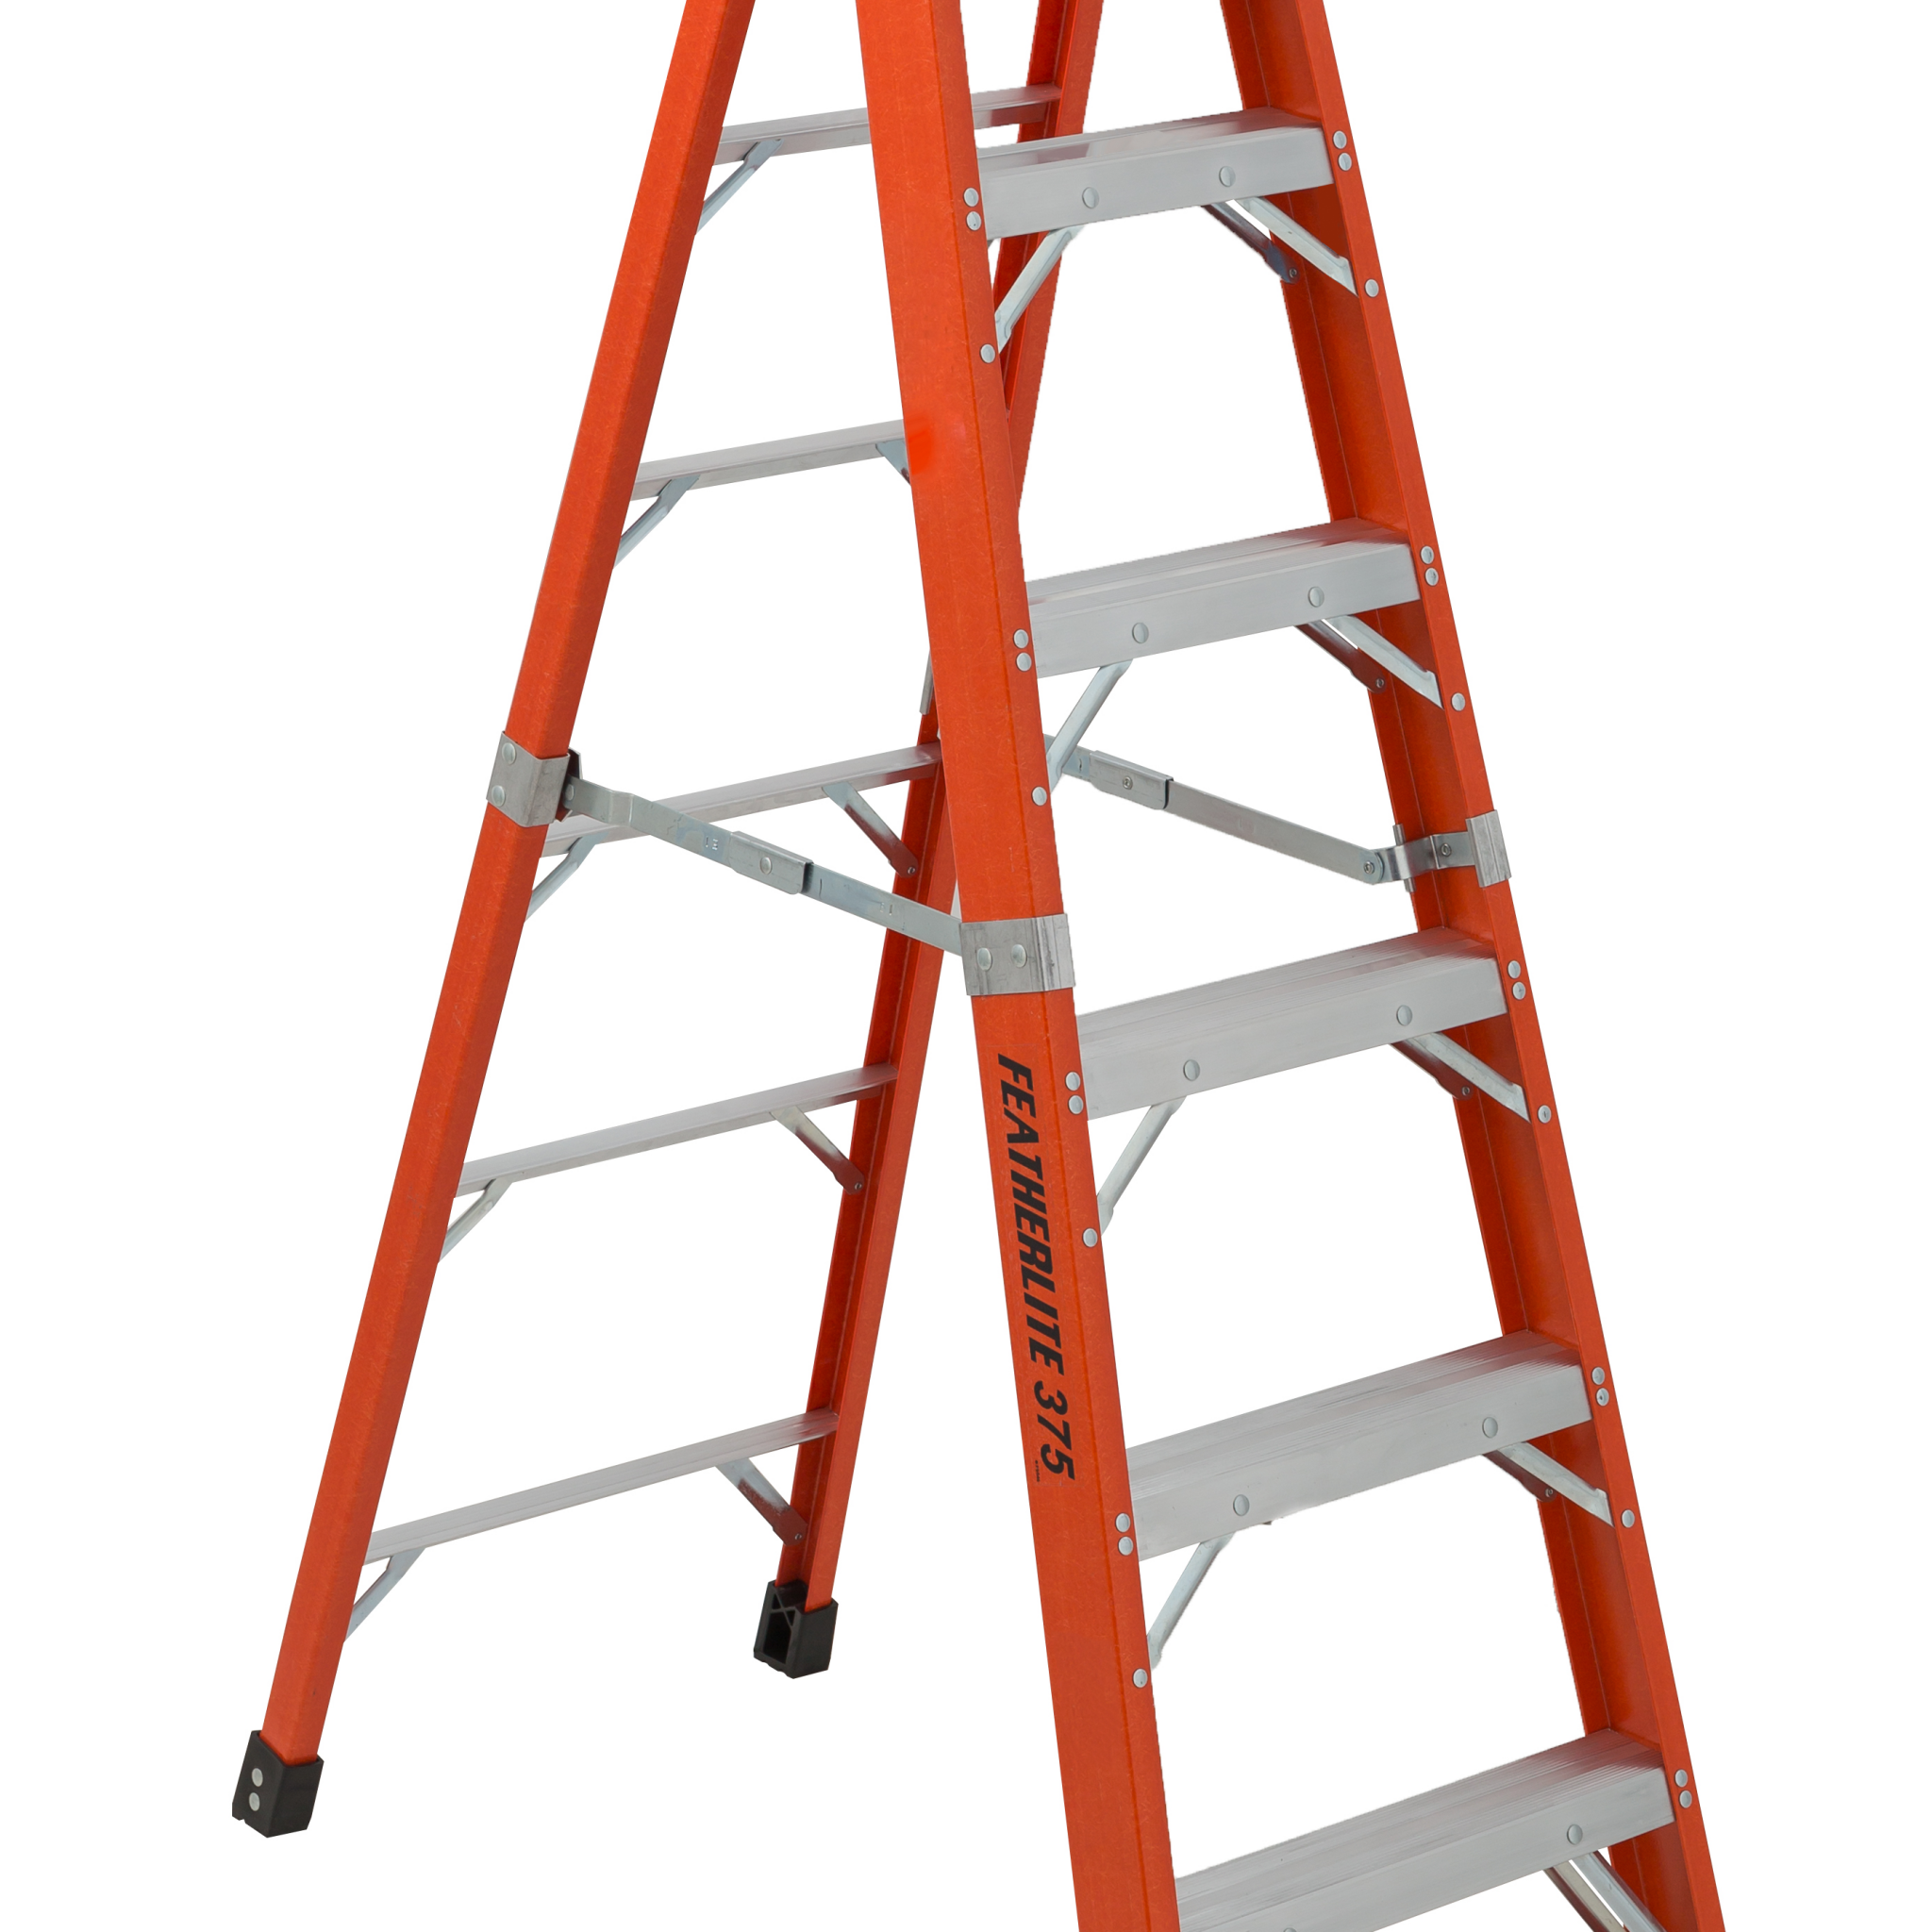 6' Extra Heavy Duty Brute Step Ladder #6806